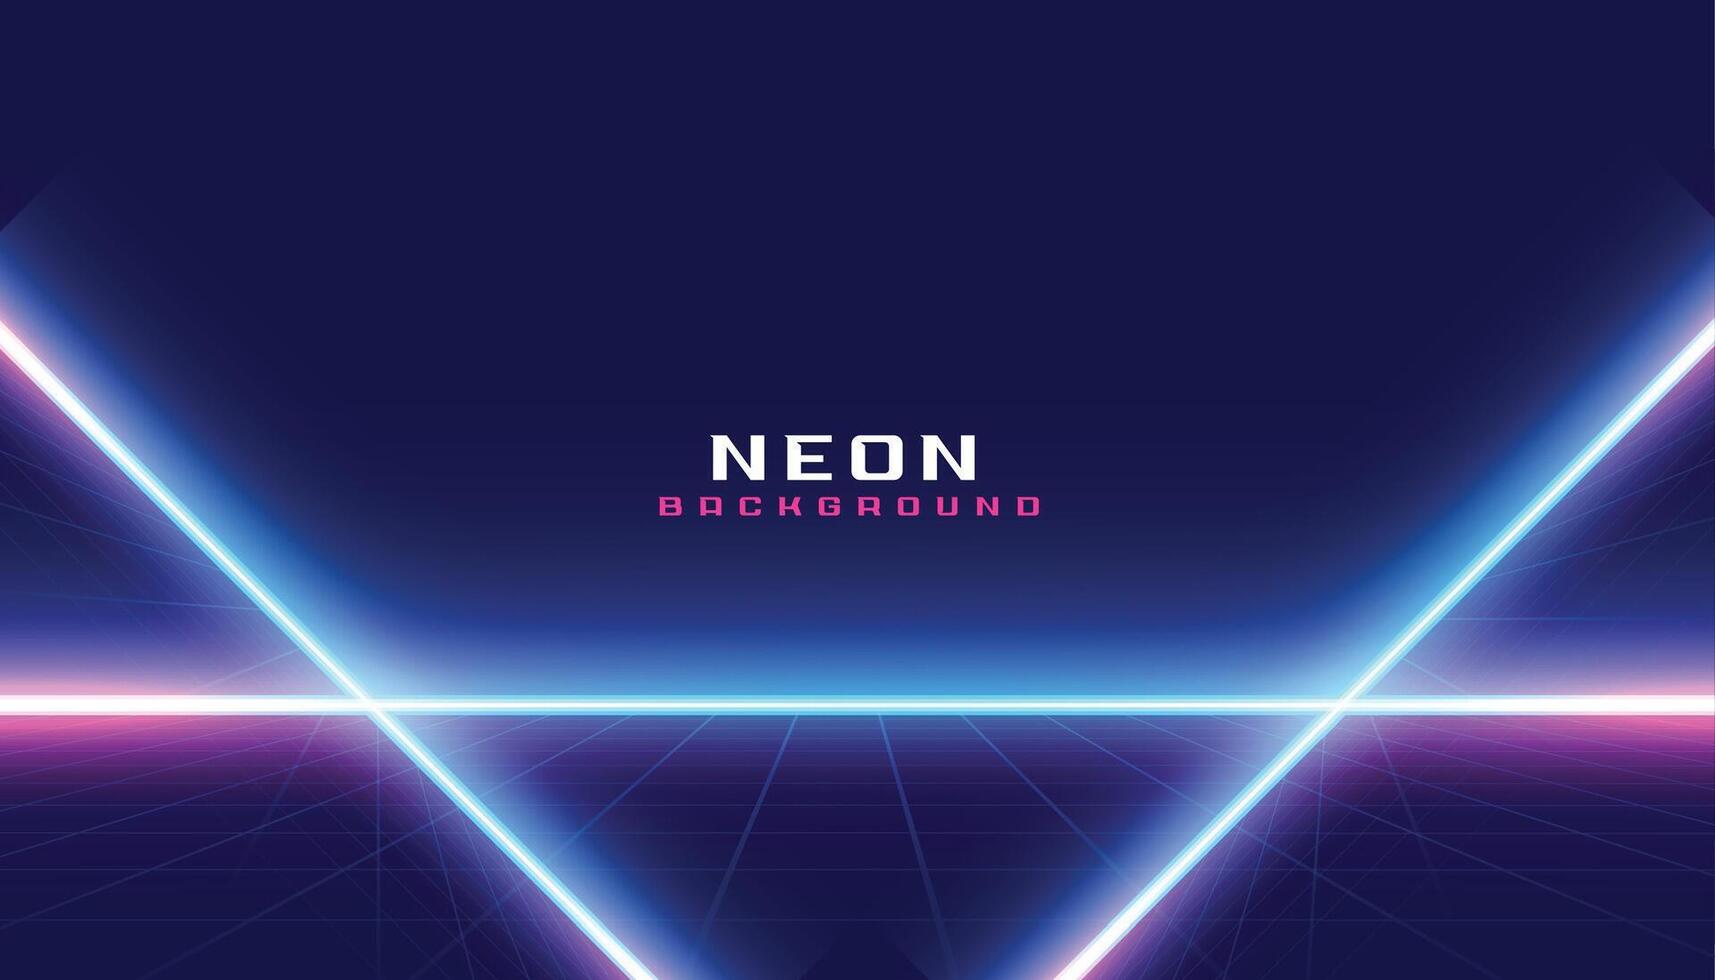 glowing neon lines for retro and synth inspired look background vector